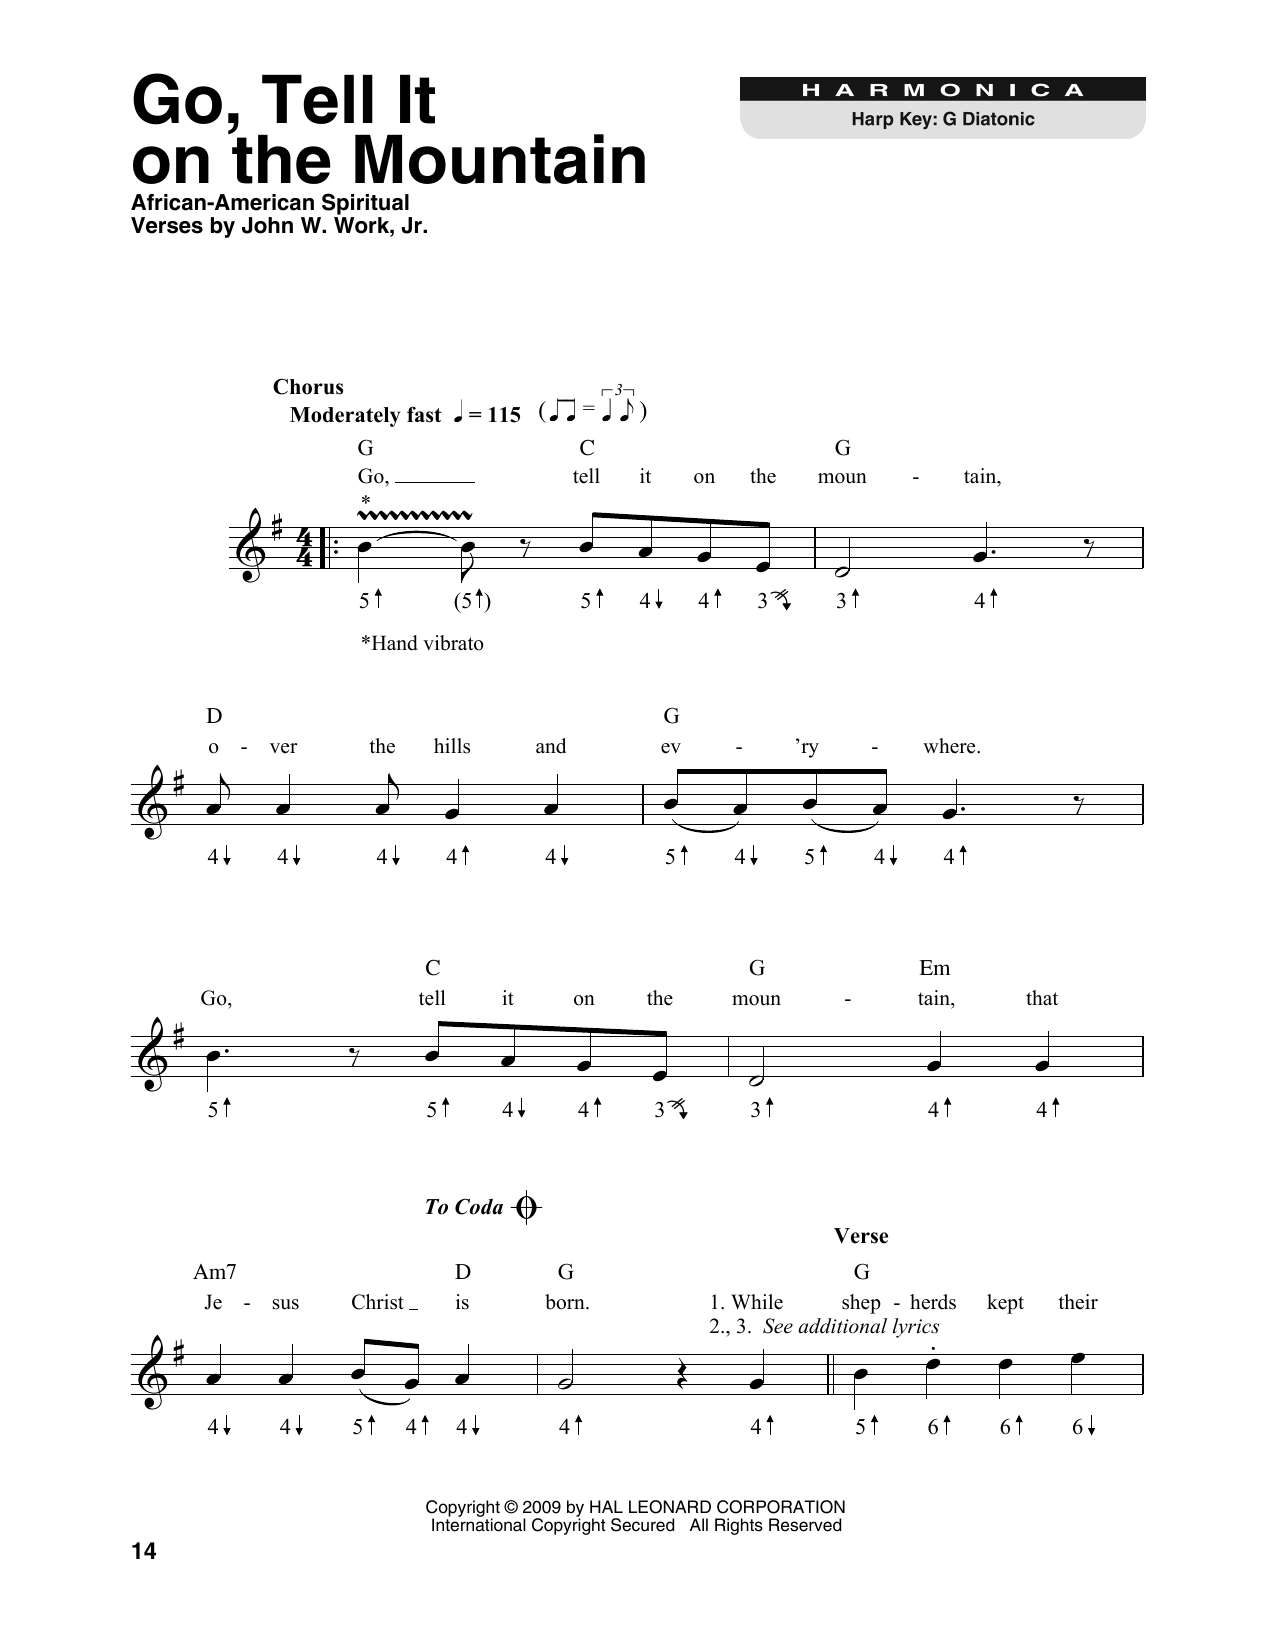 African American Spiritual Go, Tell It On The Mountain sheet music notes printable PDF score